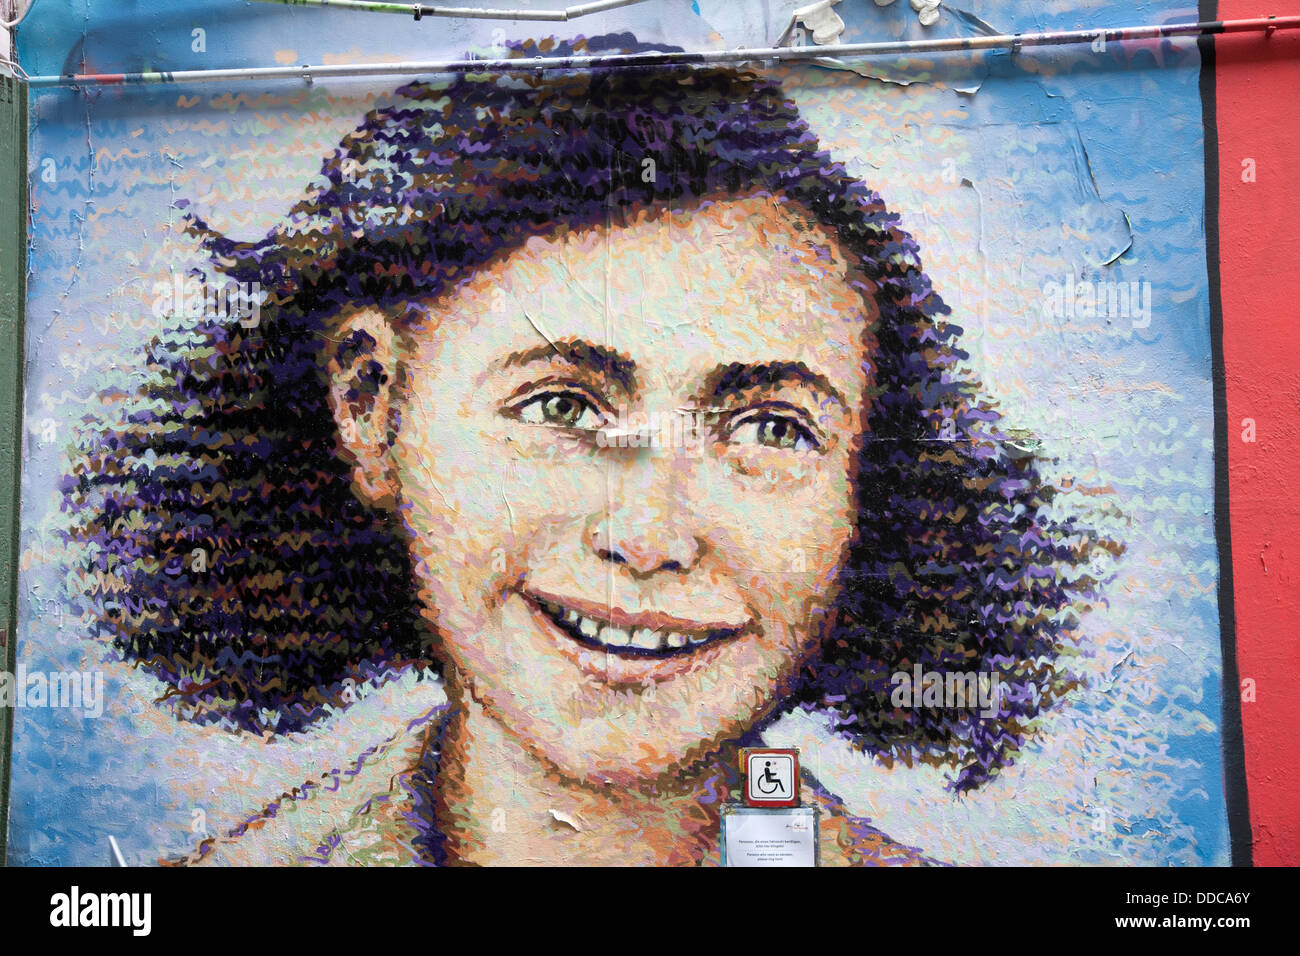 Anne Frank Mural at Center and Museum off Hackesche Hofe, Berlin, Germany Stock Photo